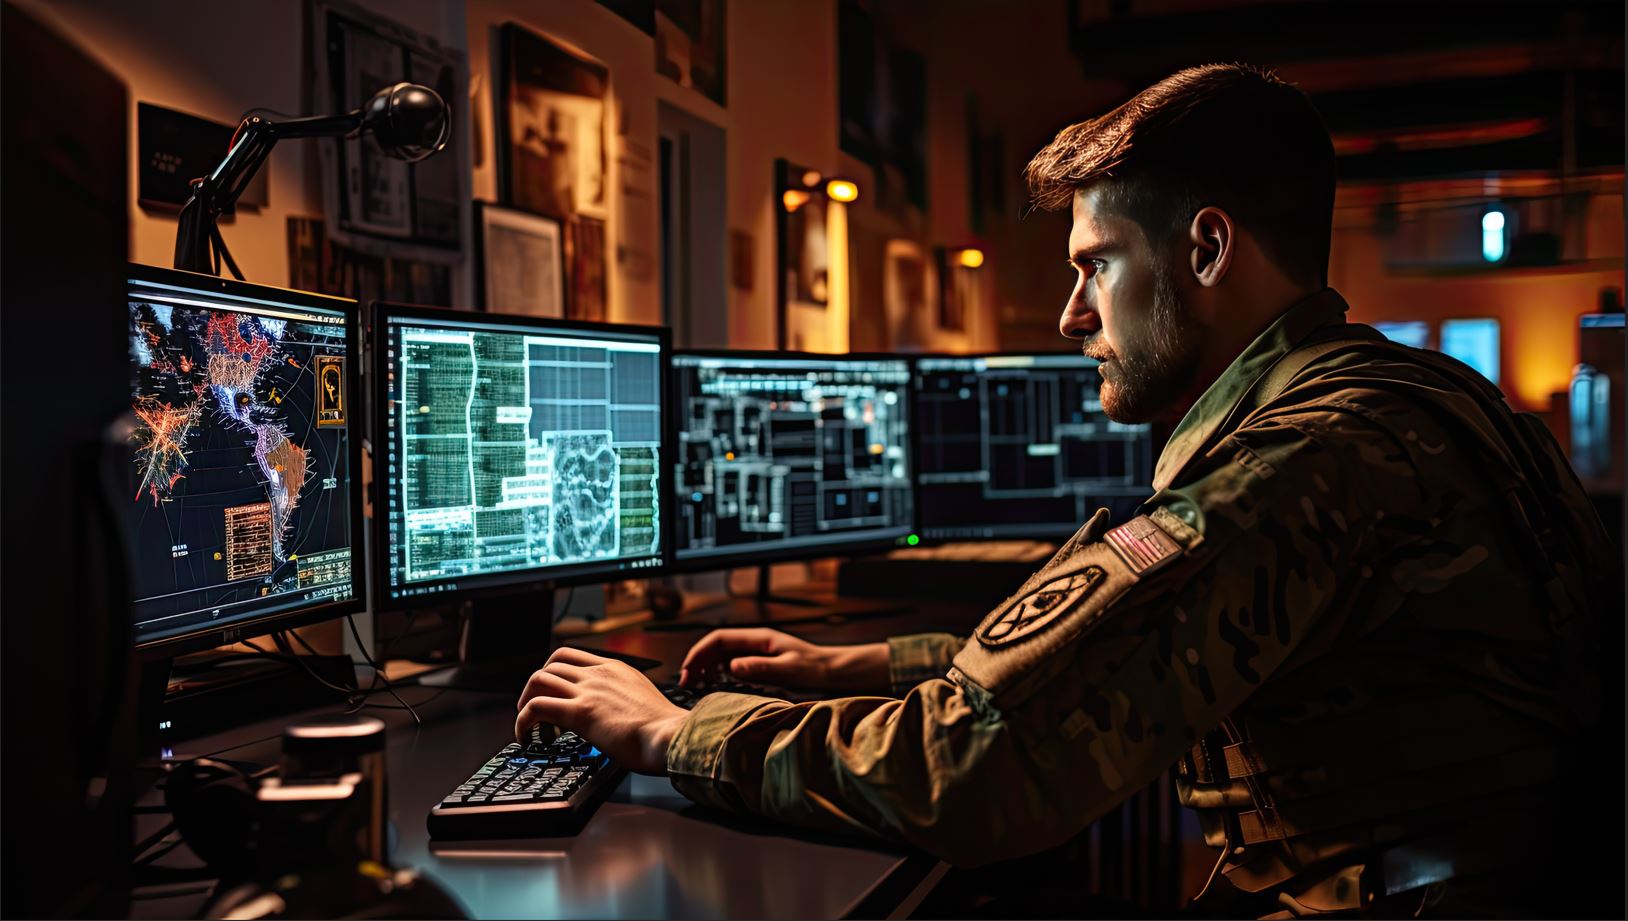 Stock image of soldier using a computer